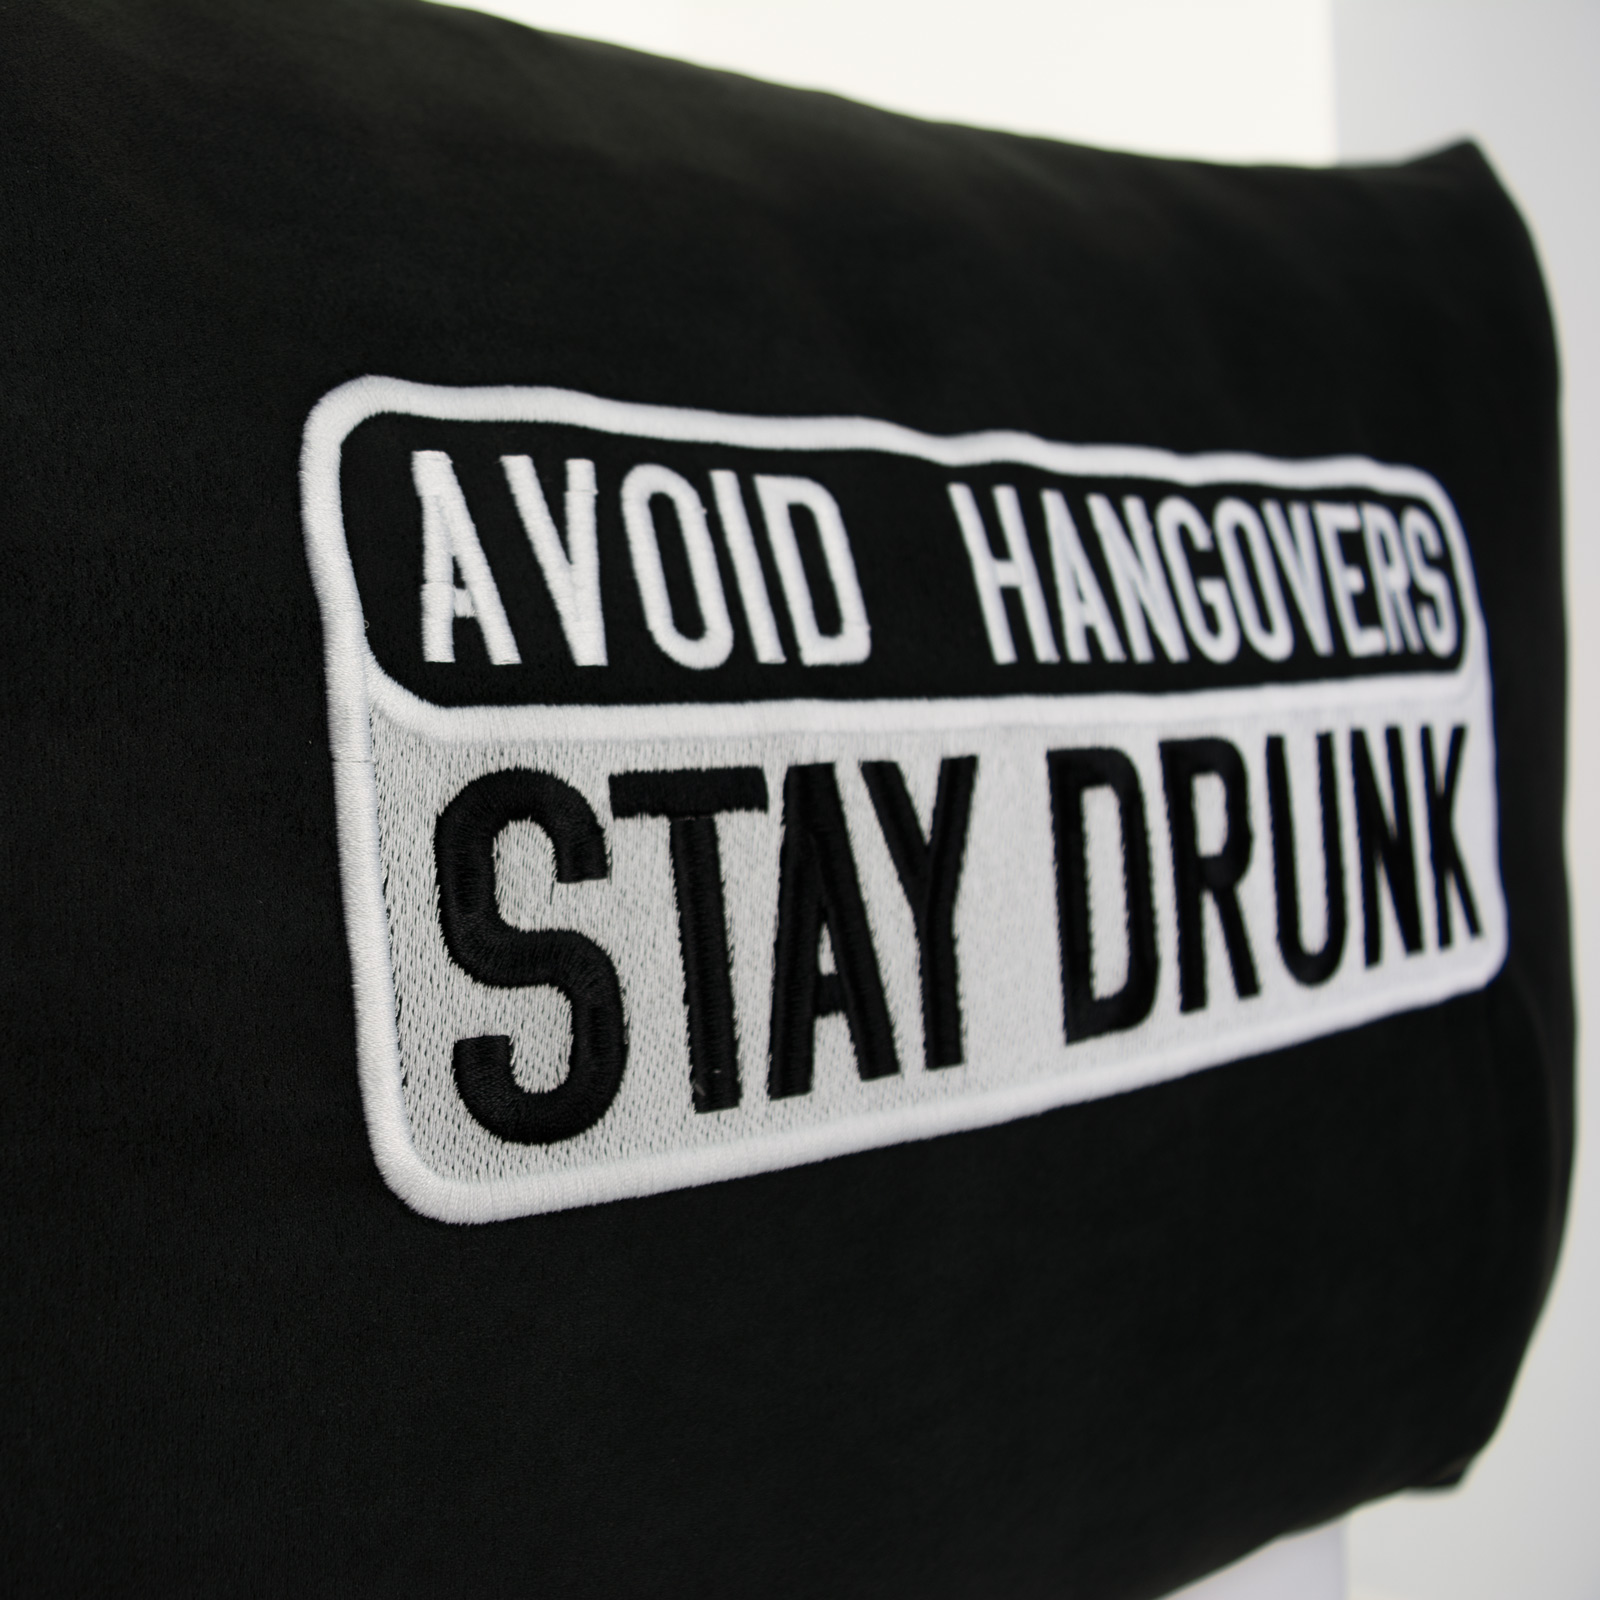 Avoid Hangovers - Stay Drunk